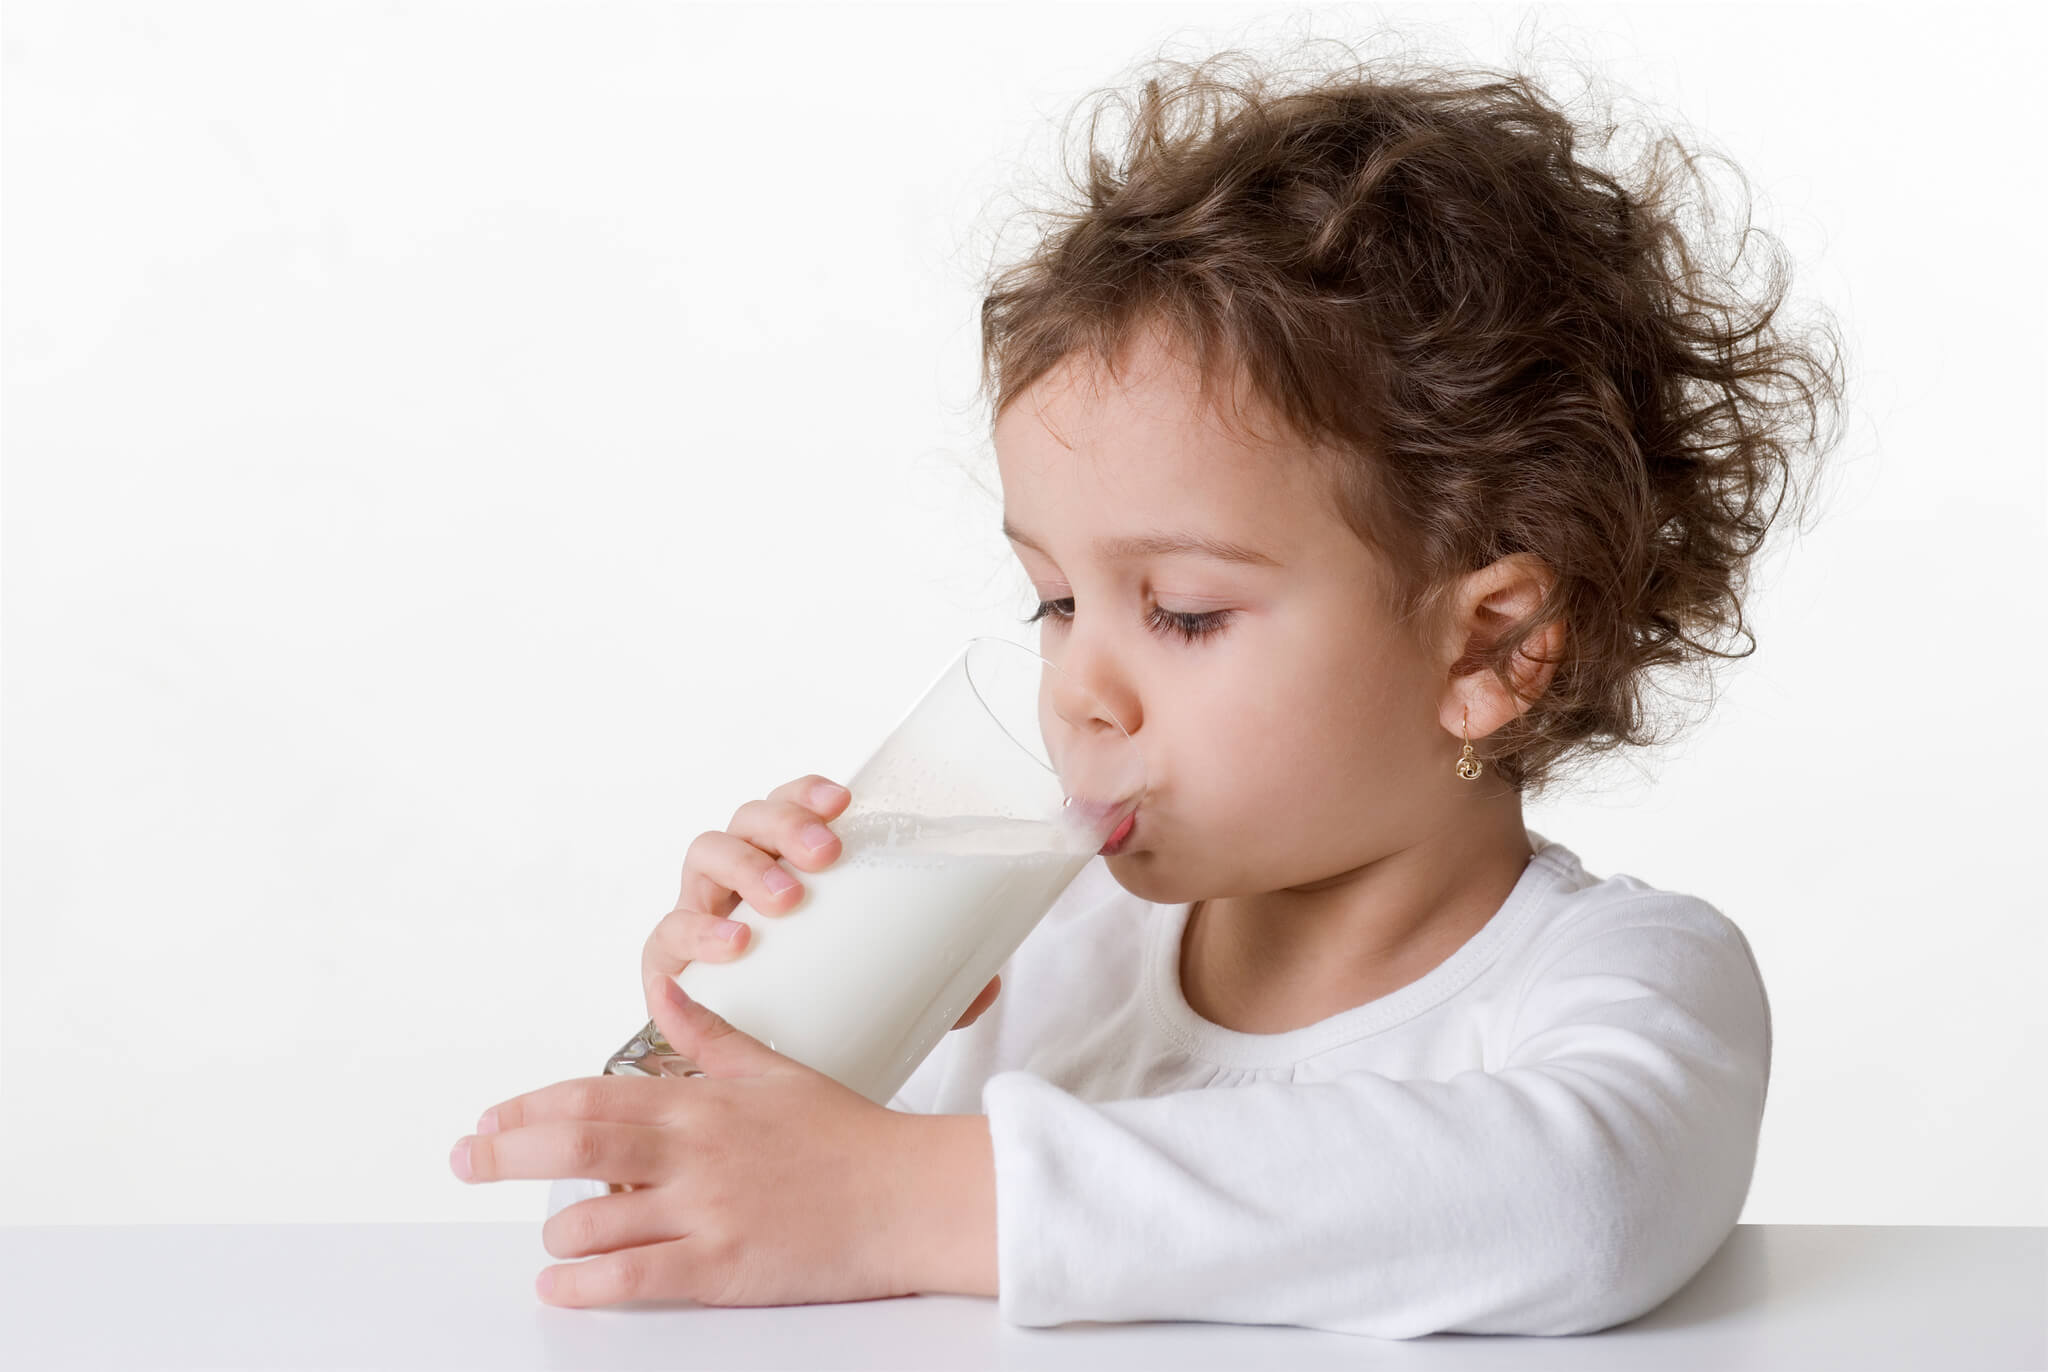 A little girl in a white t-shirt seated on a white table, drinking a glass of milk.